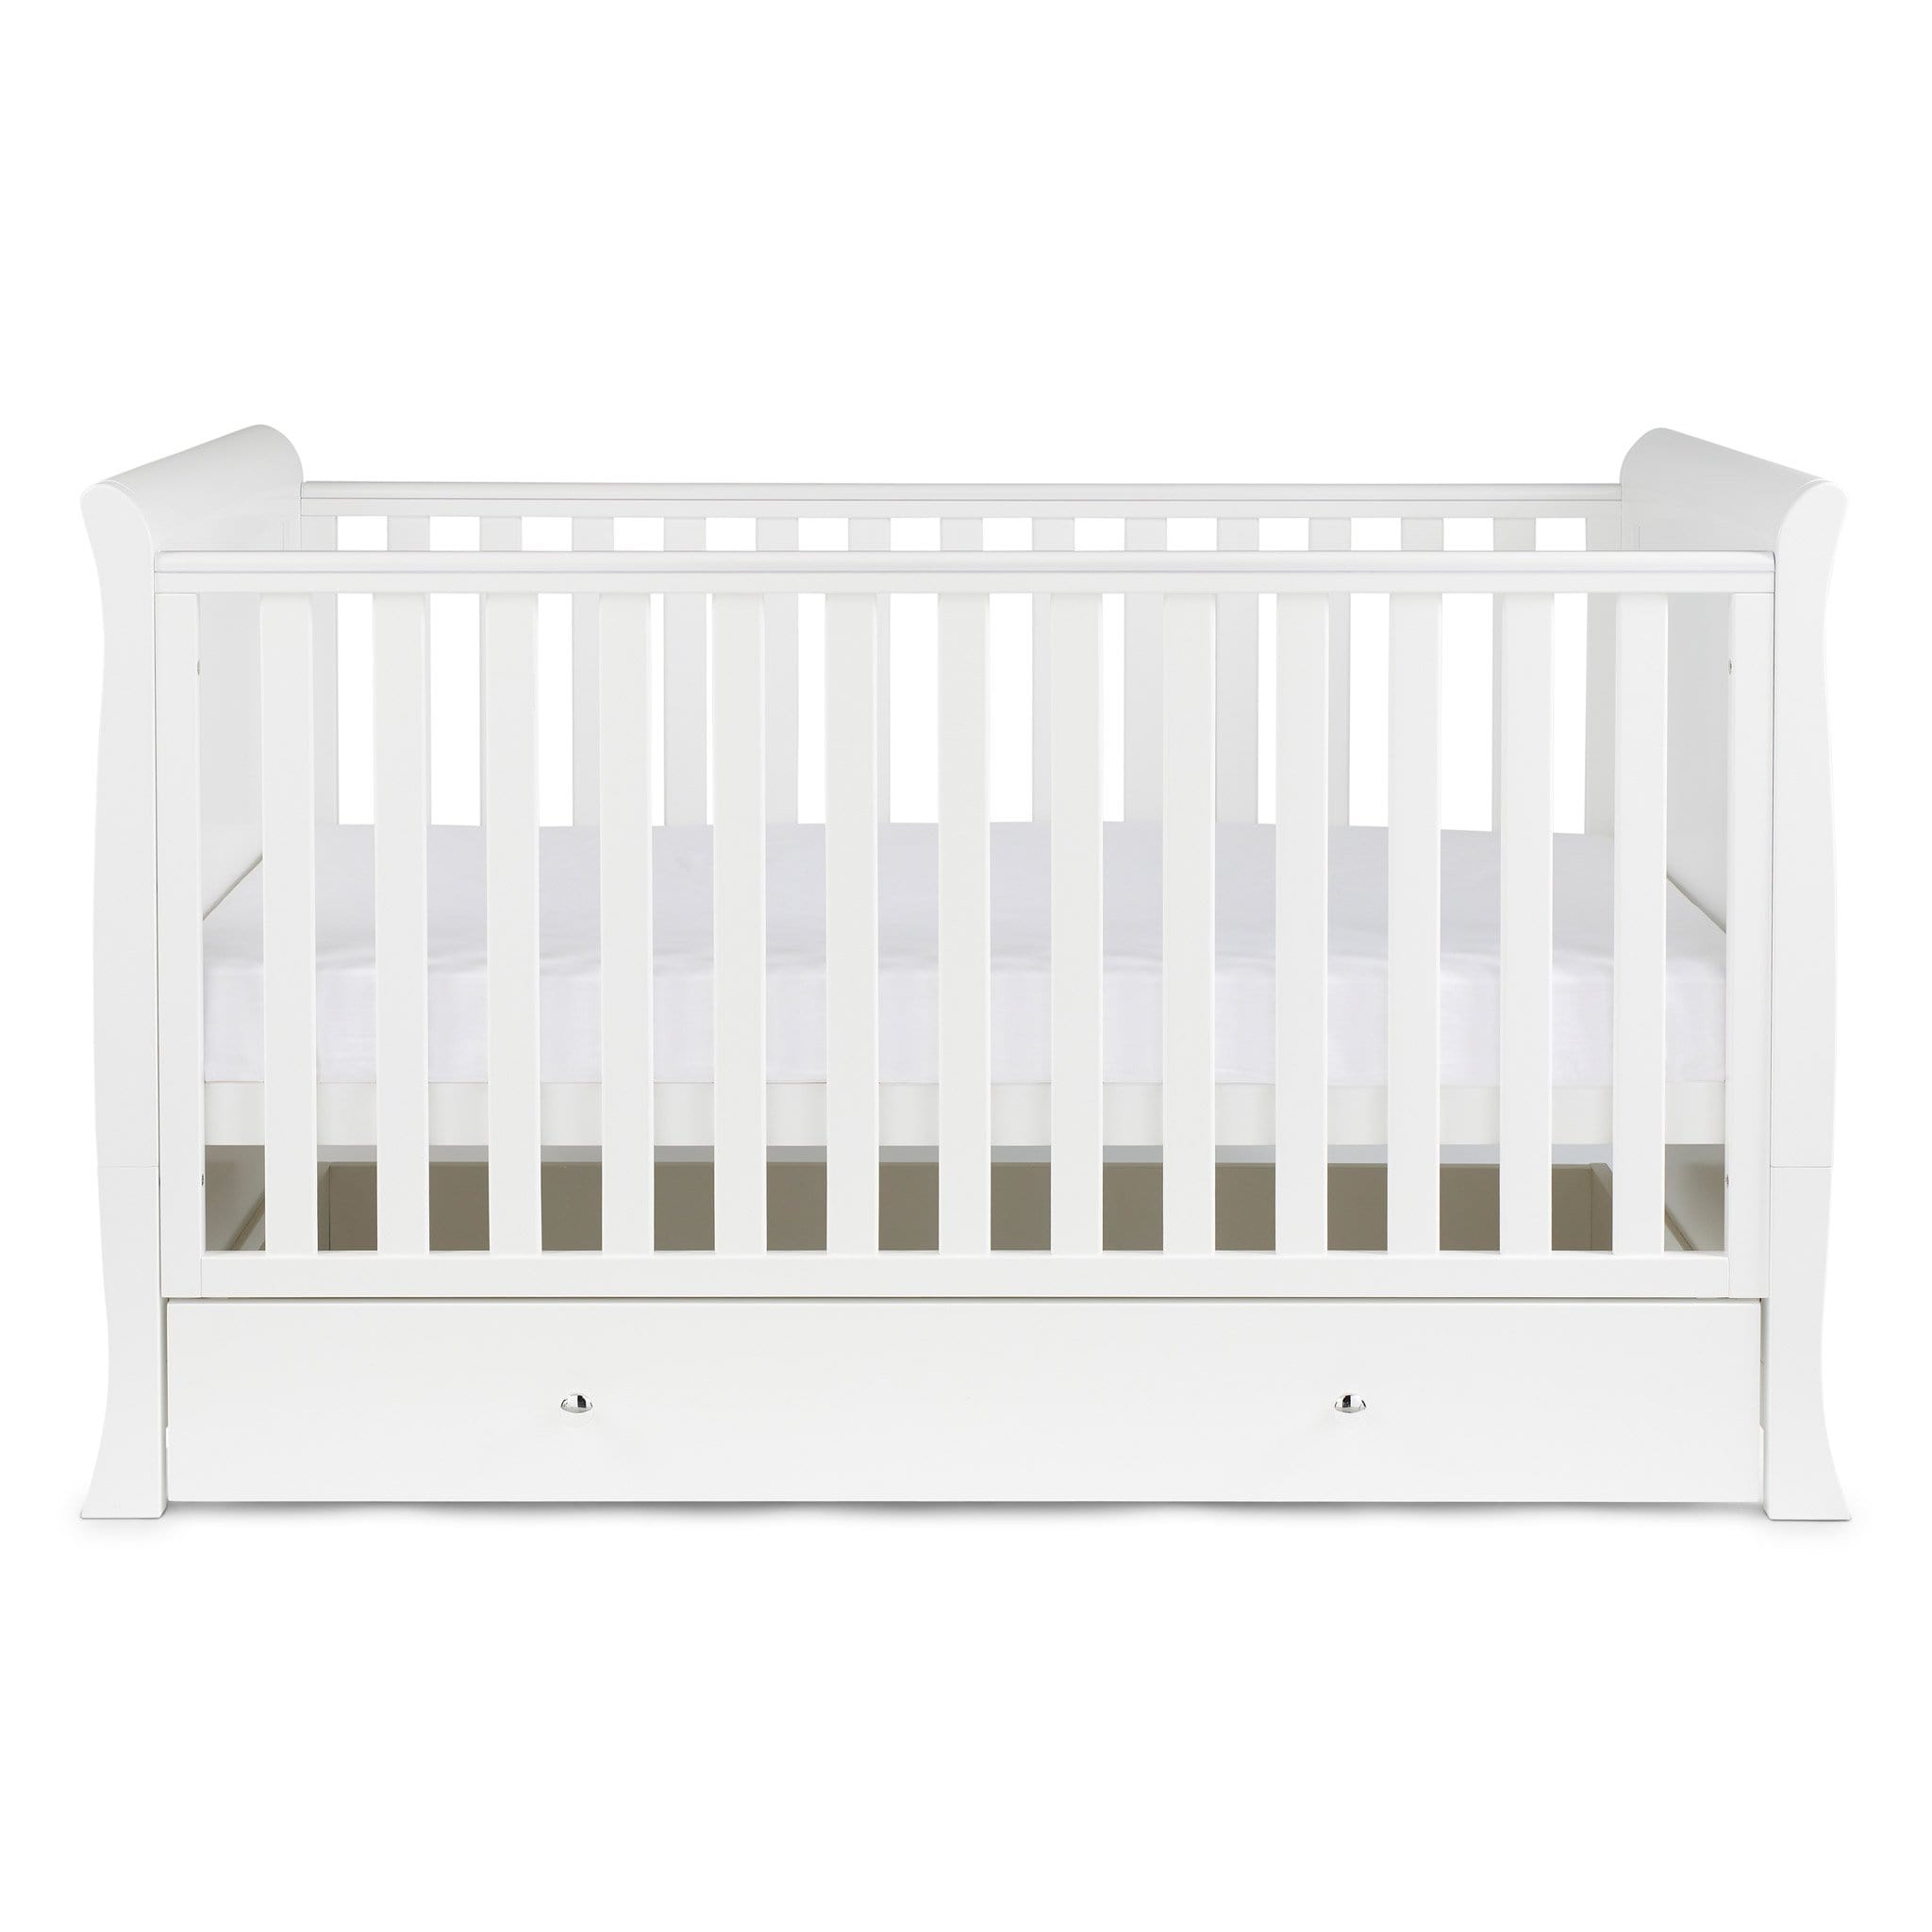 Ickle Bubba Nursery Room Sets Ickle Bubba Snowdon Classic 2 Piece Furniture Set - White